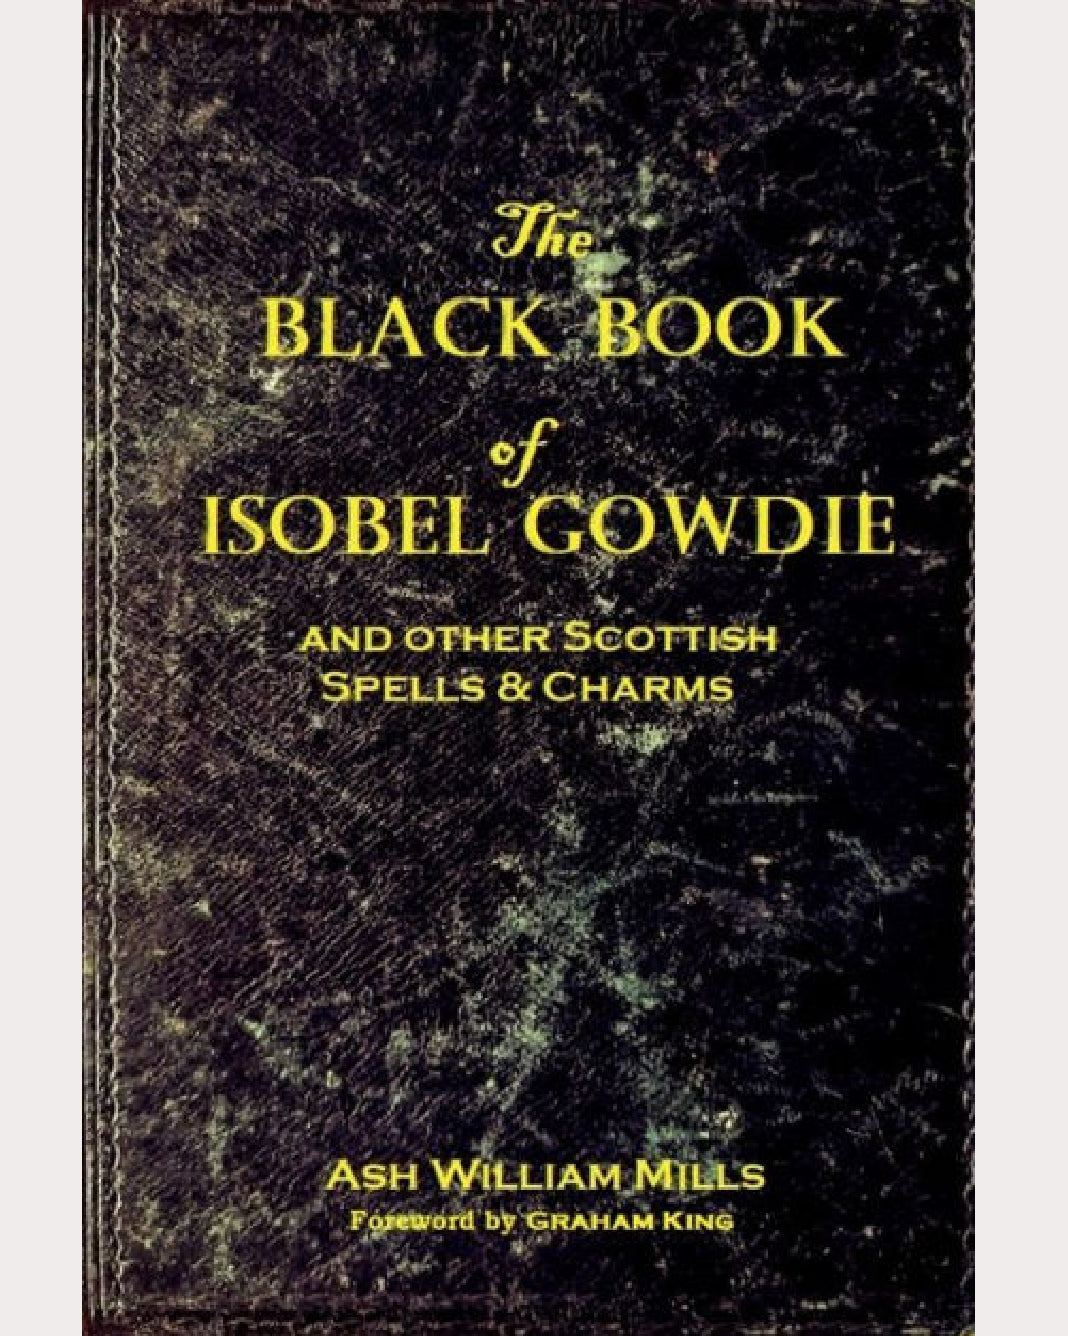 The Black Book of Isobel Gowdie